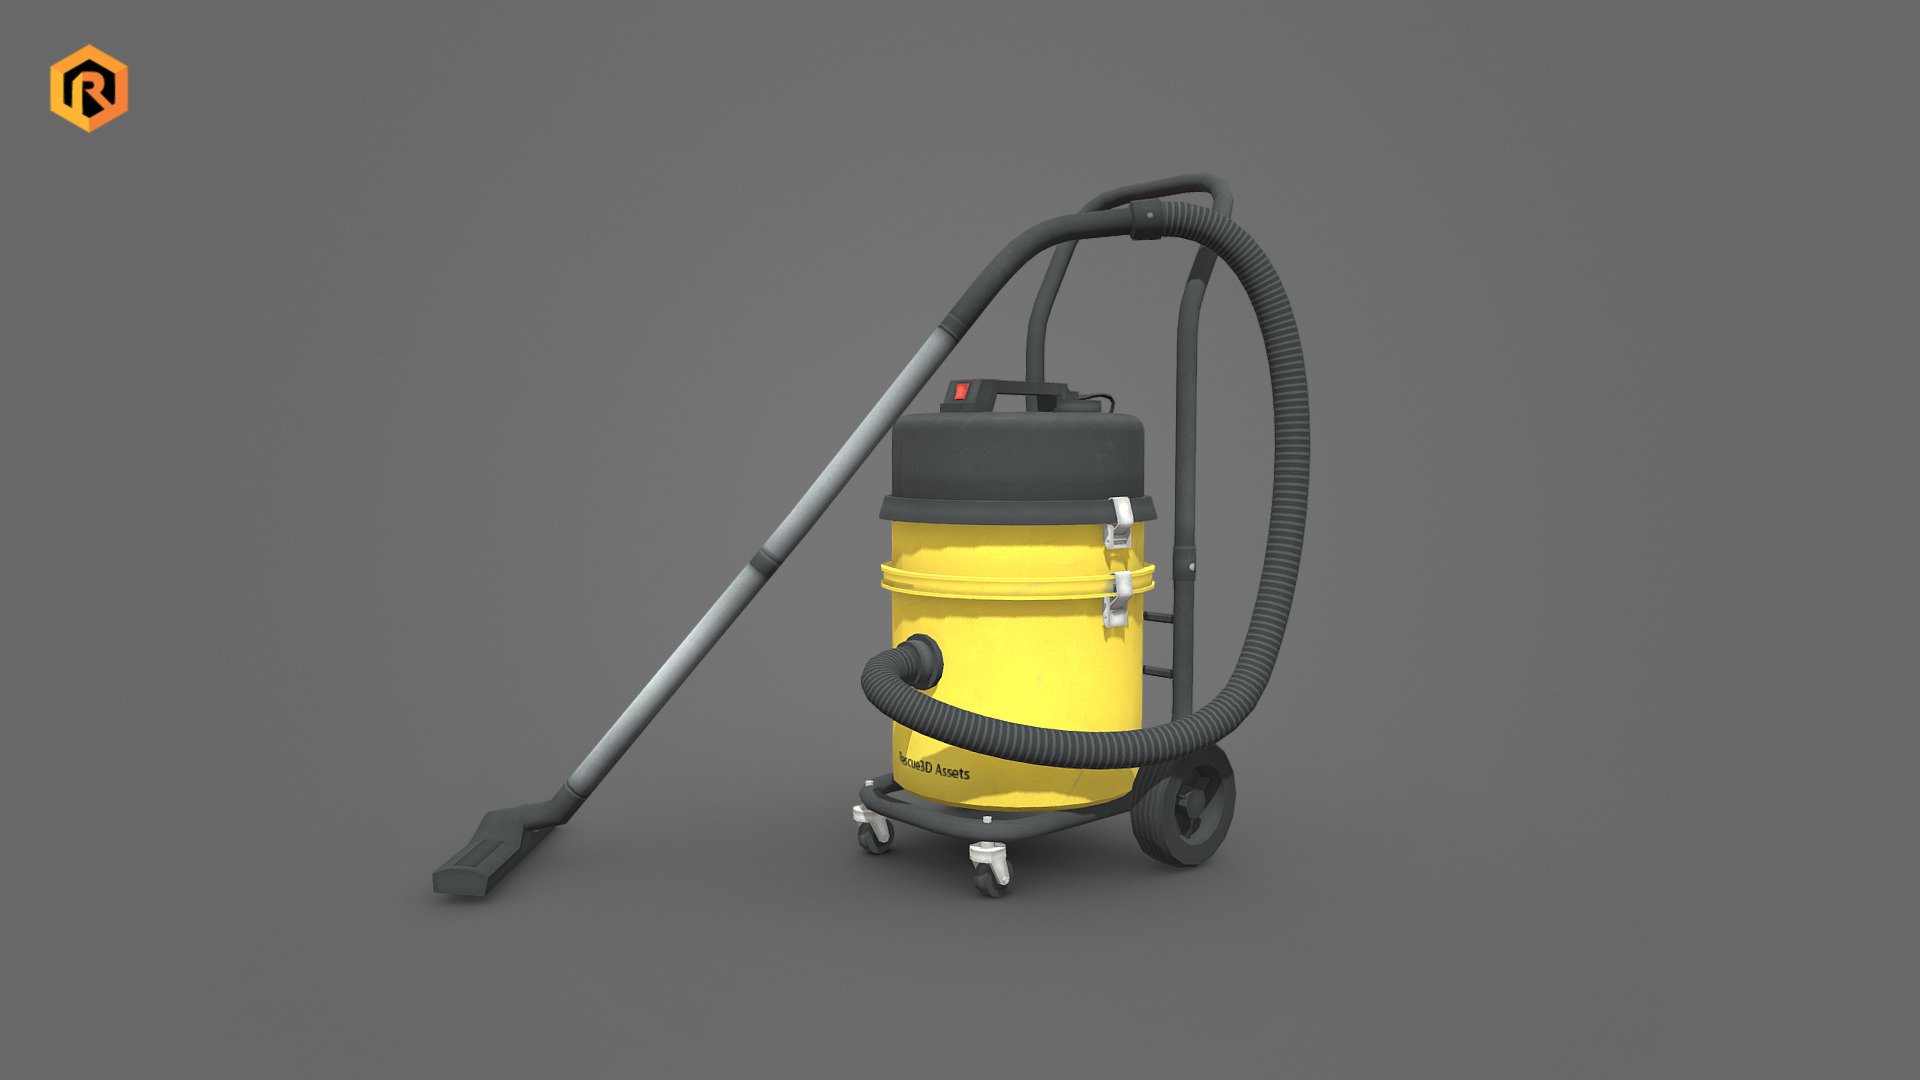 High quality low-poly model of a small Industrial Vacuum Cleaner. It is best for use in games and other real-time applications.

The model is built with great attention to details and realistic proportions with correct geometry.

Textures are very detailed so it makes this model good enough for close-up. 

Technical details:




2048x2048 Diffuse and AO textures textures set.

4571 Triangles.

4270  Vertices.

Model is one mesh.

Model completely unwrapped.

Model is fully textured with all materials applied. 

Pivot point centered at world origin.

Model scaled to approximate real world size (centimeters).

All nodes, materials and textures are appropriately named.
 - Vacuum Cleaner - Download Free 3D model by Rescue3D Assets (@rescue3d) 3d model